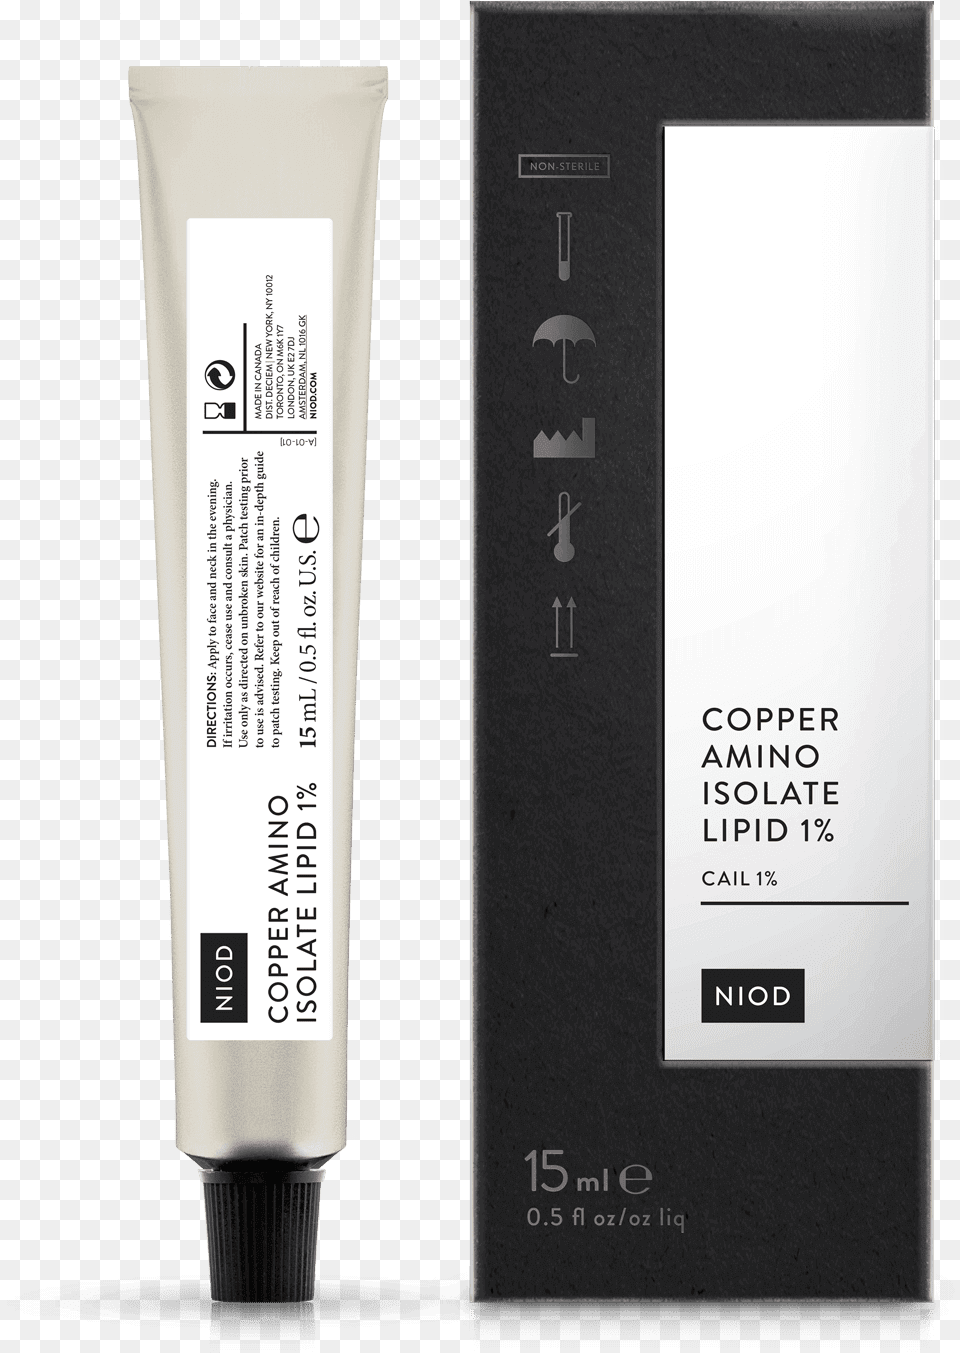 Niod Copper Amino Isolate Lipid, Bottle, Aftershave, Toothpaste Png